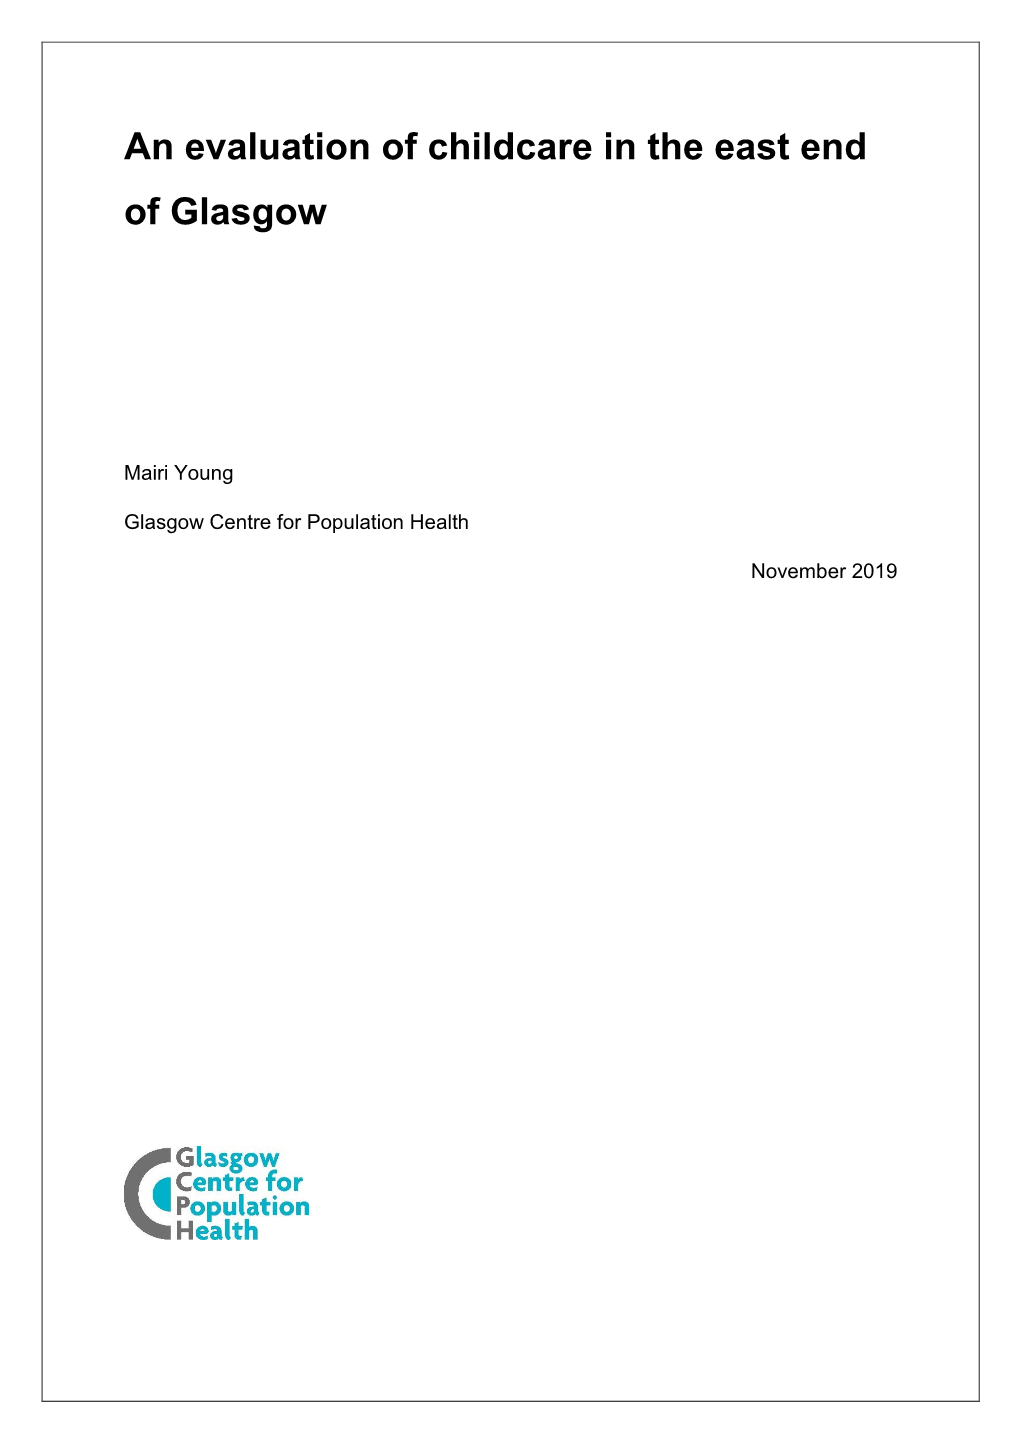 An Evaluation of Childcare in the East End of Glasgow